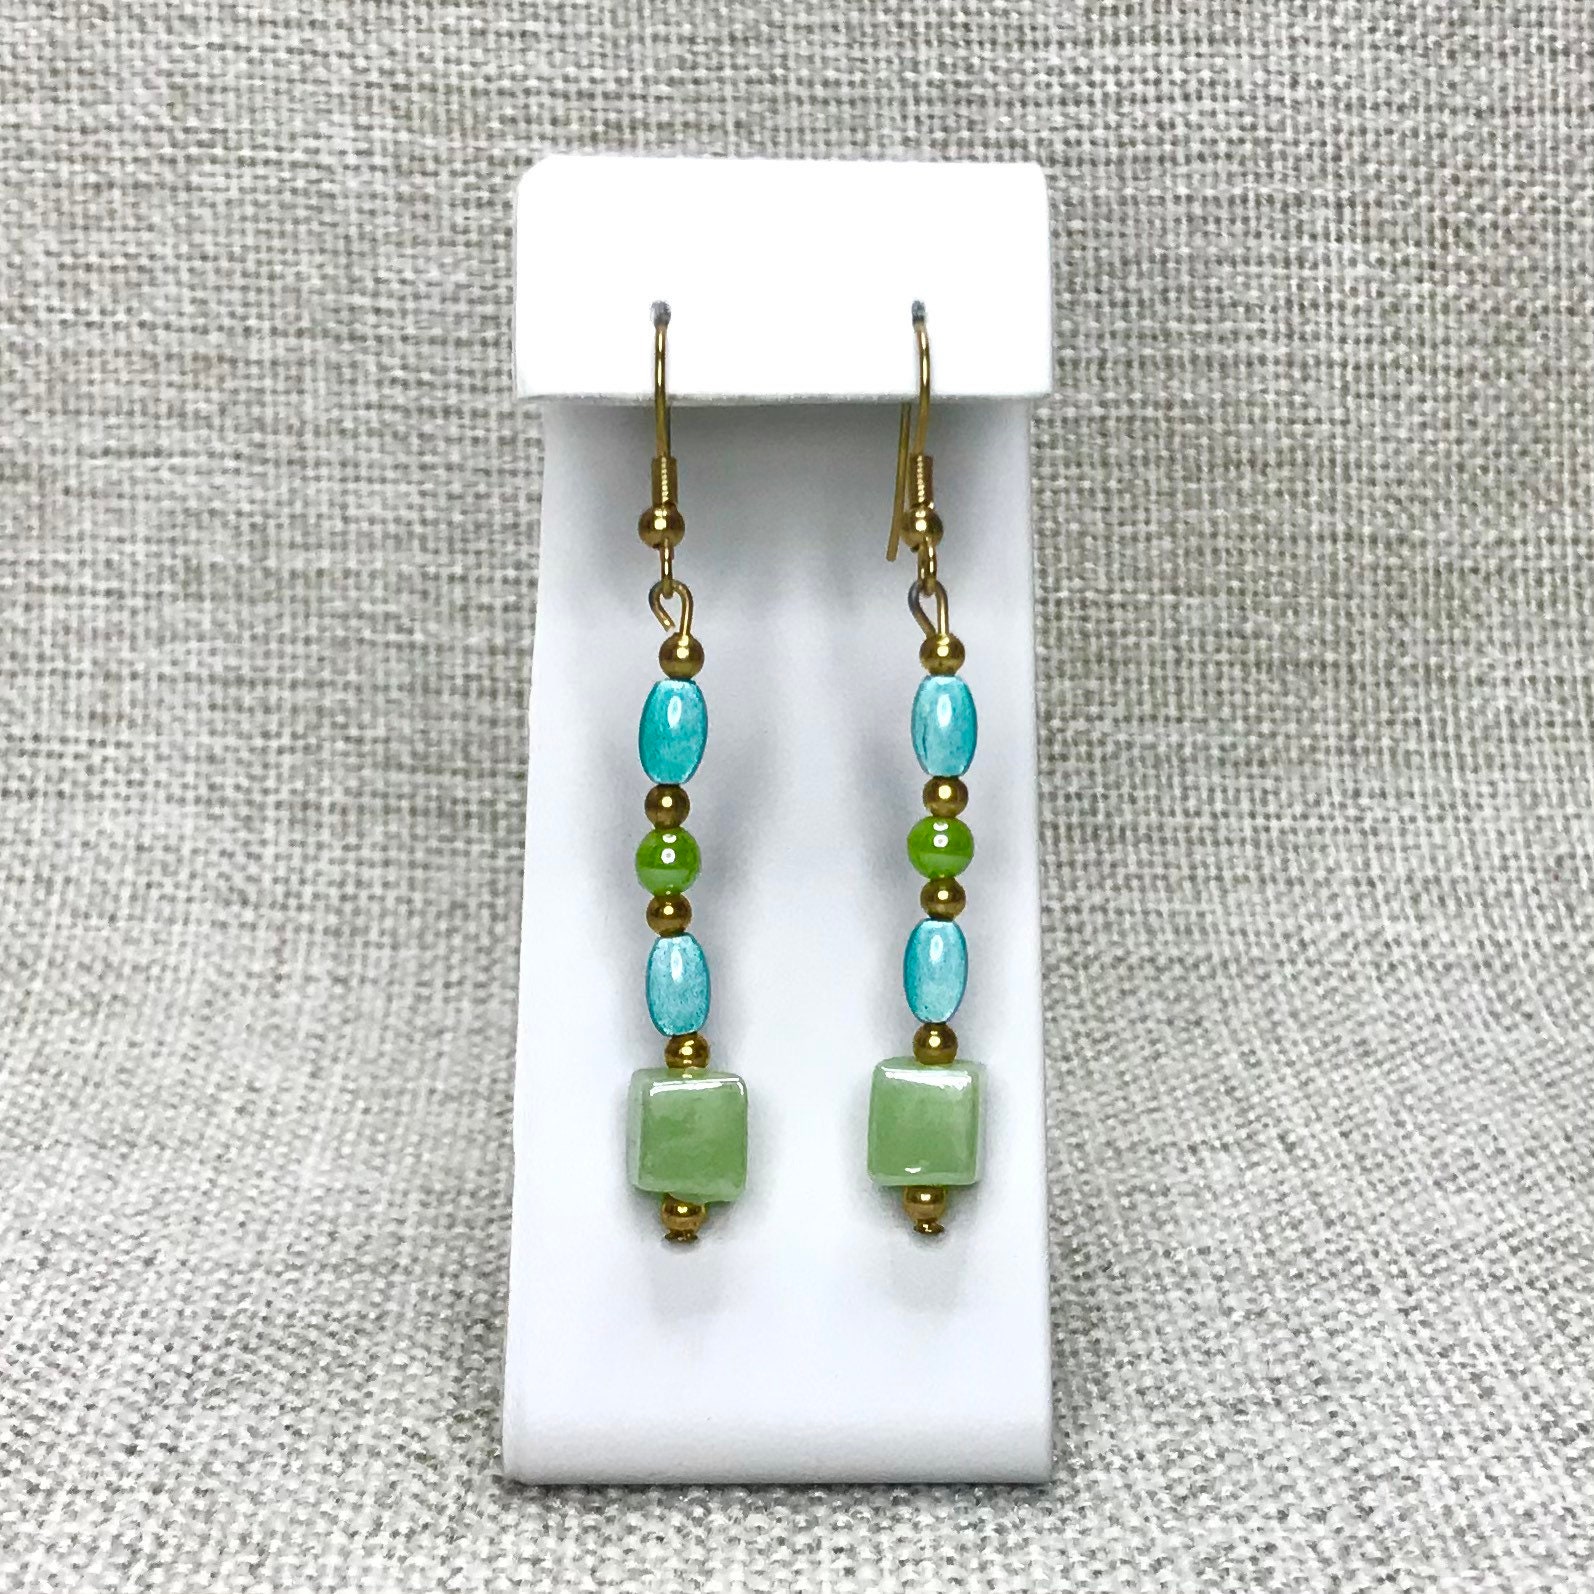 Vintage Green and Blue Dangle Earrings Vintage Jewellery Gift for Her. Gold Tone Ear Wire Beaded Earrings Costume Jewelry